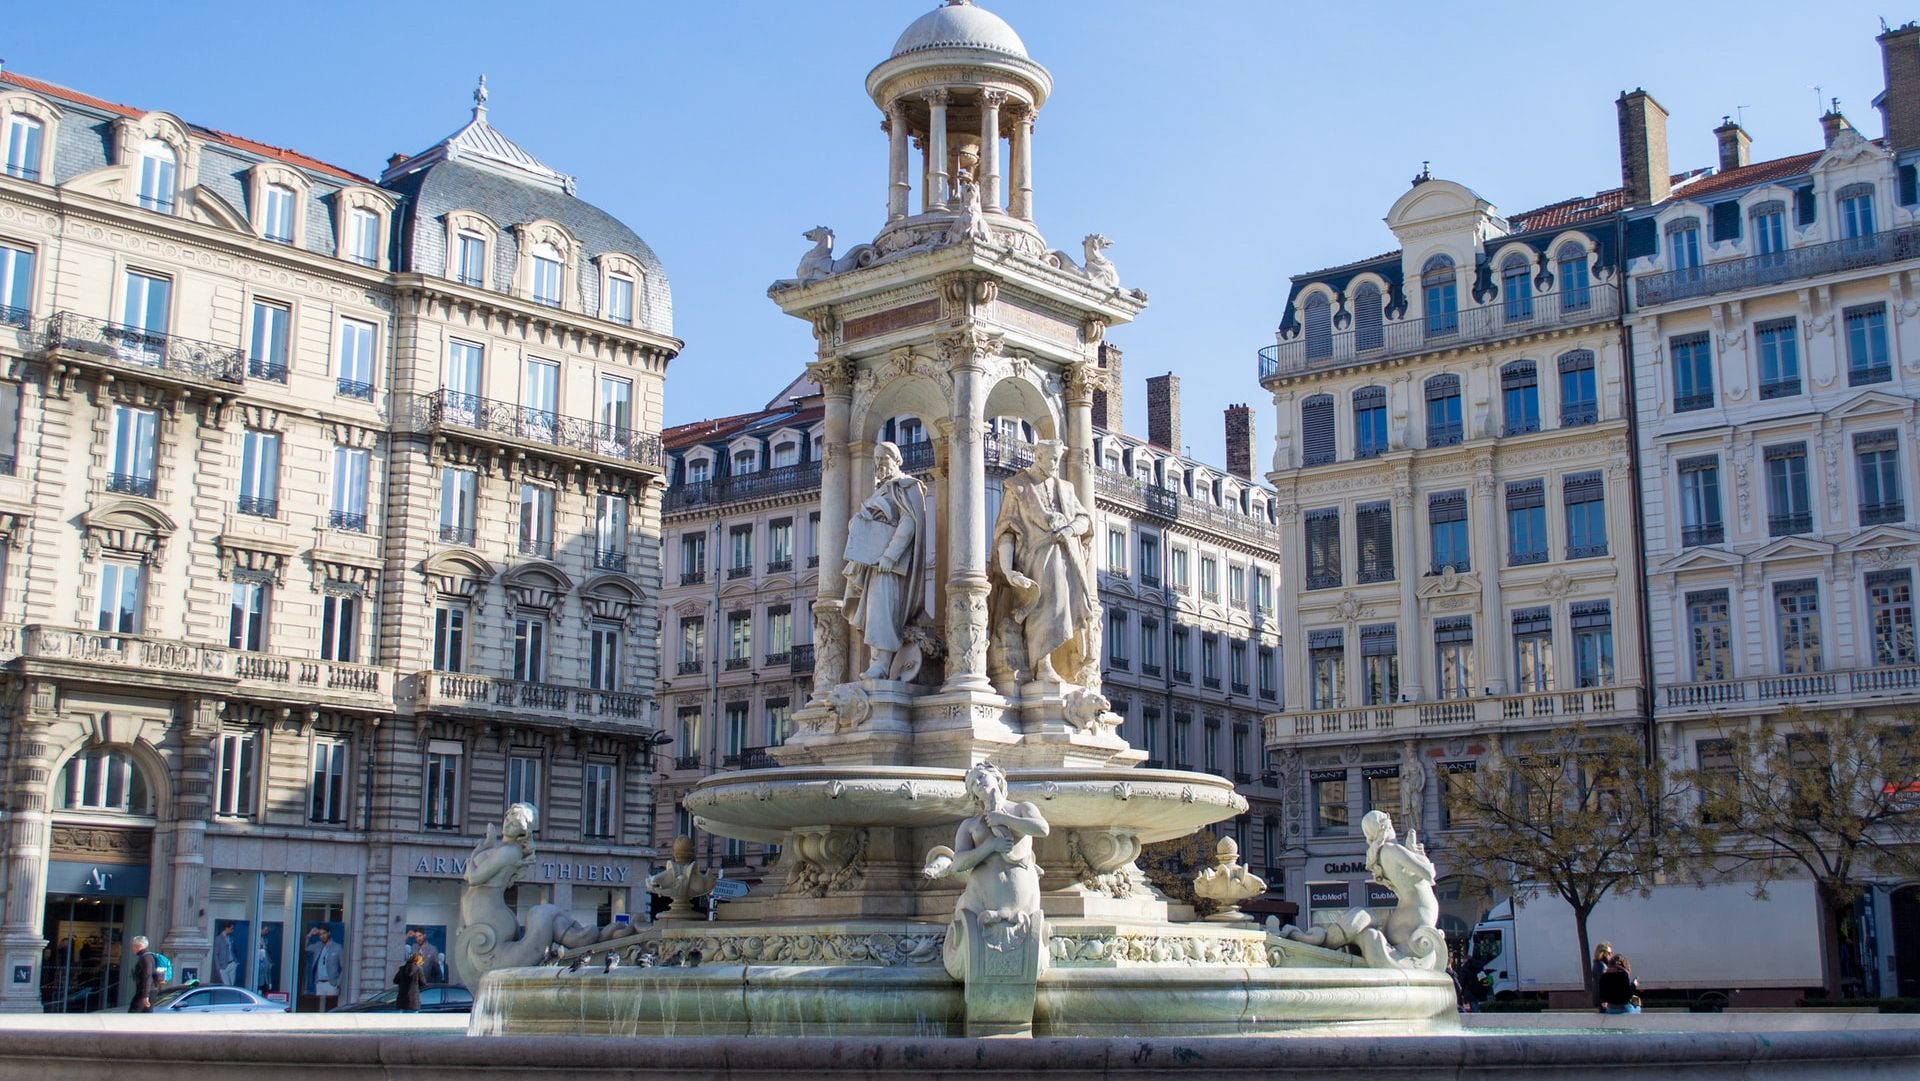 Located in the heart of Lyon, the Presqu'île is an exciting area packed with attractions and fabulous hotels. It is the best area to stay in Lyon for first-time visitors.